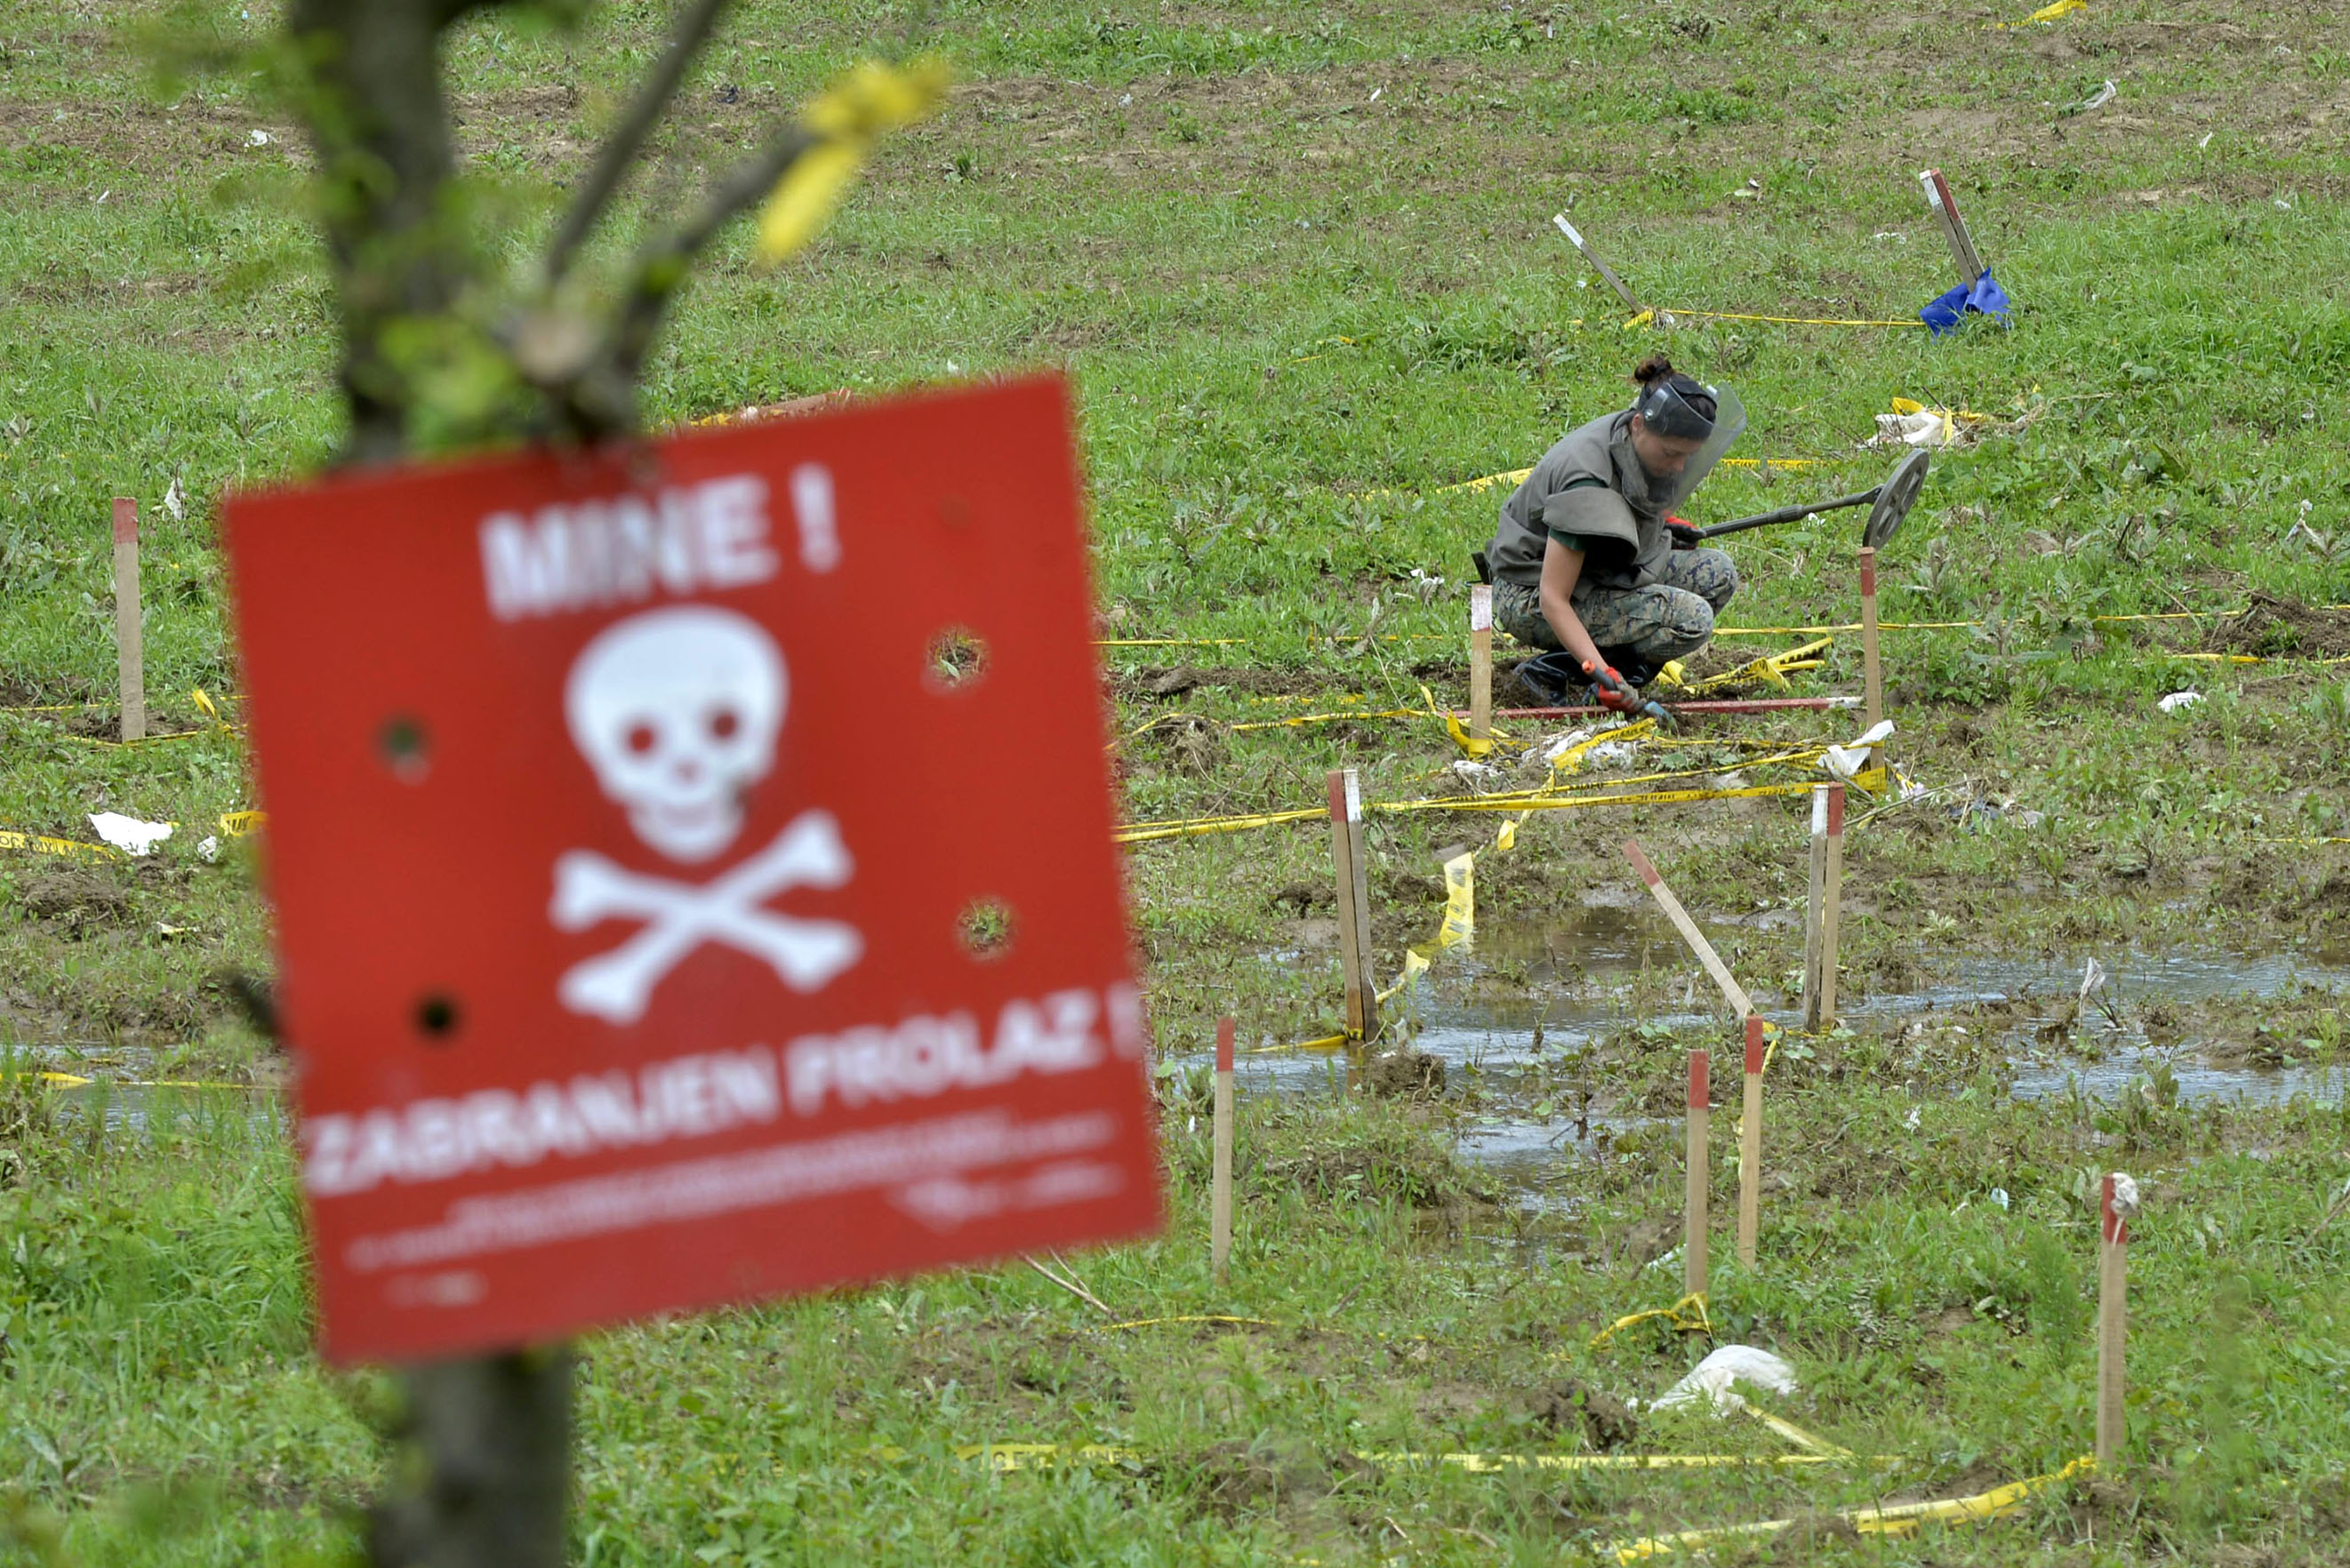 A Bosnian soldier searches for mines in fields near the banks of the river Bosnia which flooded near the town of Visoko, 30 km north of Sarajevo, Bosnia-Herzegovina on Tuesday May 20, 2014. At least two dozen people have died and tens of thousands of people have been forced from their homes. But in addition to the usual dangers, the flooding has unearthed landmines left over from Bosnia's 1992-95 war and washed away the signs that marked them. (AP Photo/Sulejman Omerbasic)